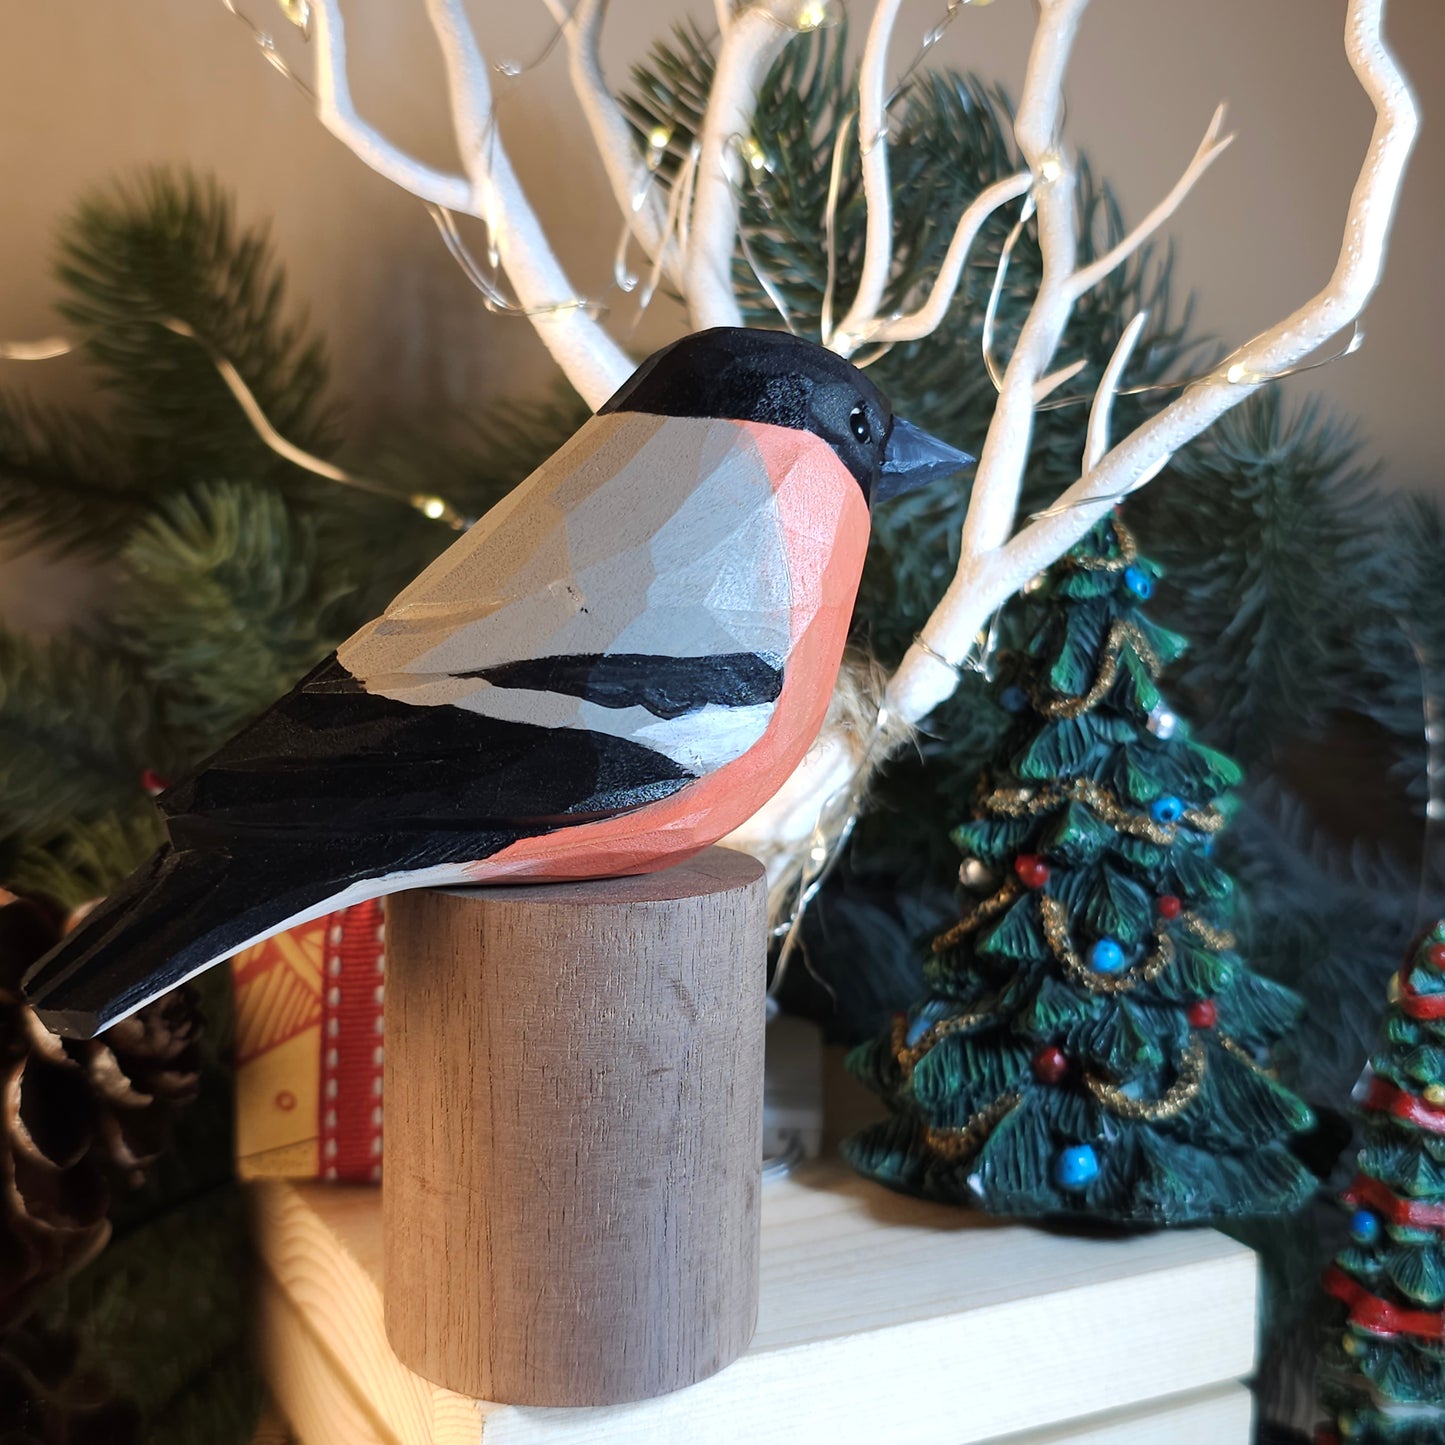 Handcrafted Wooden Bullfinch Figurine - A Masterpiece of Nature in Miniature